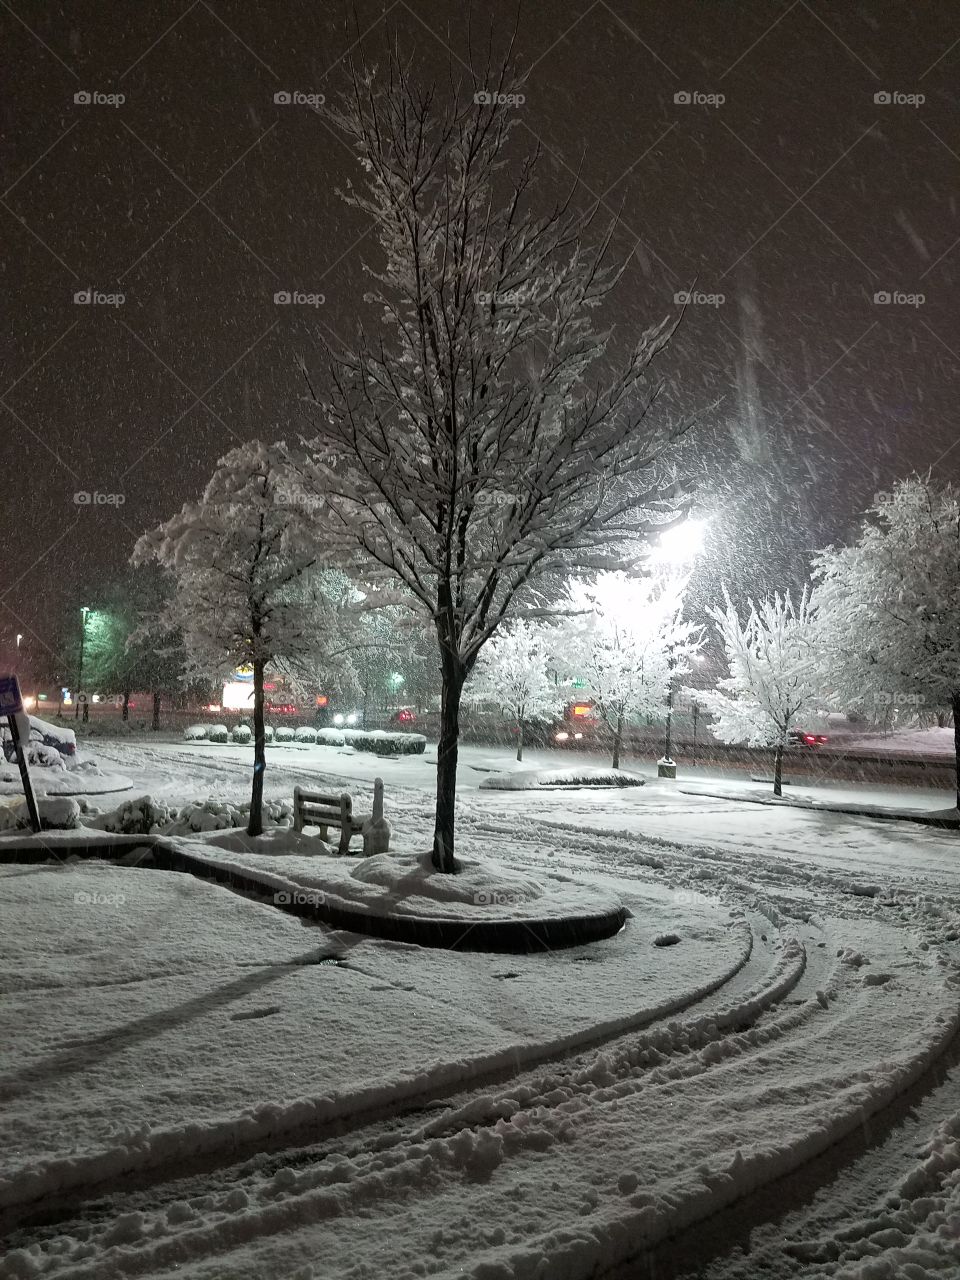 A snowy night in a small town.